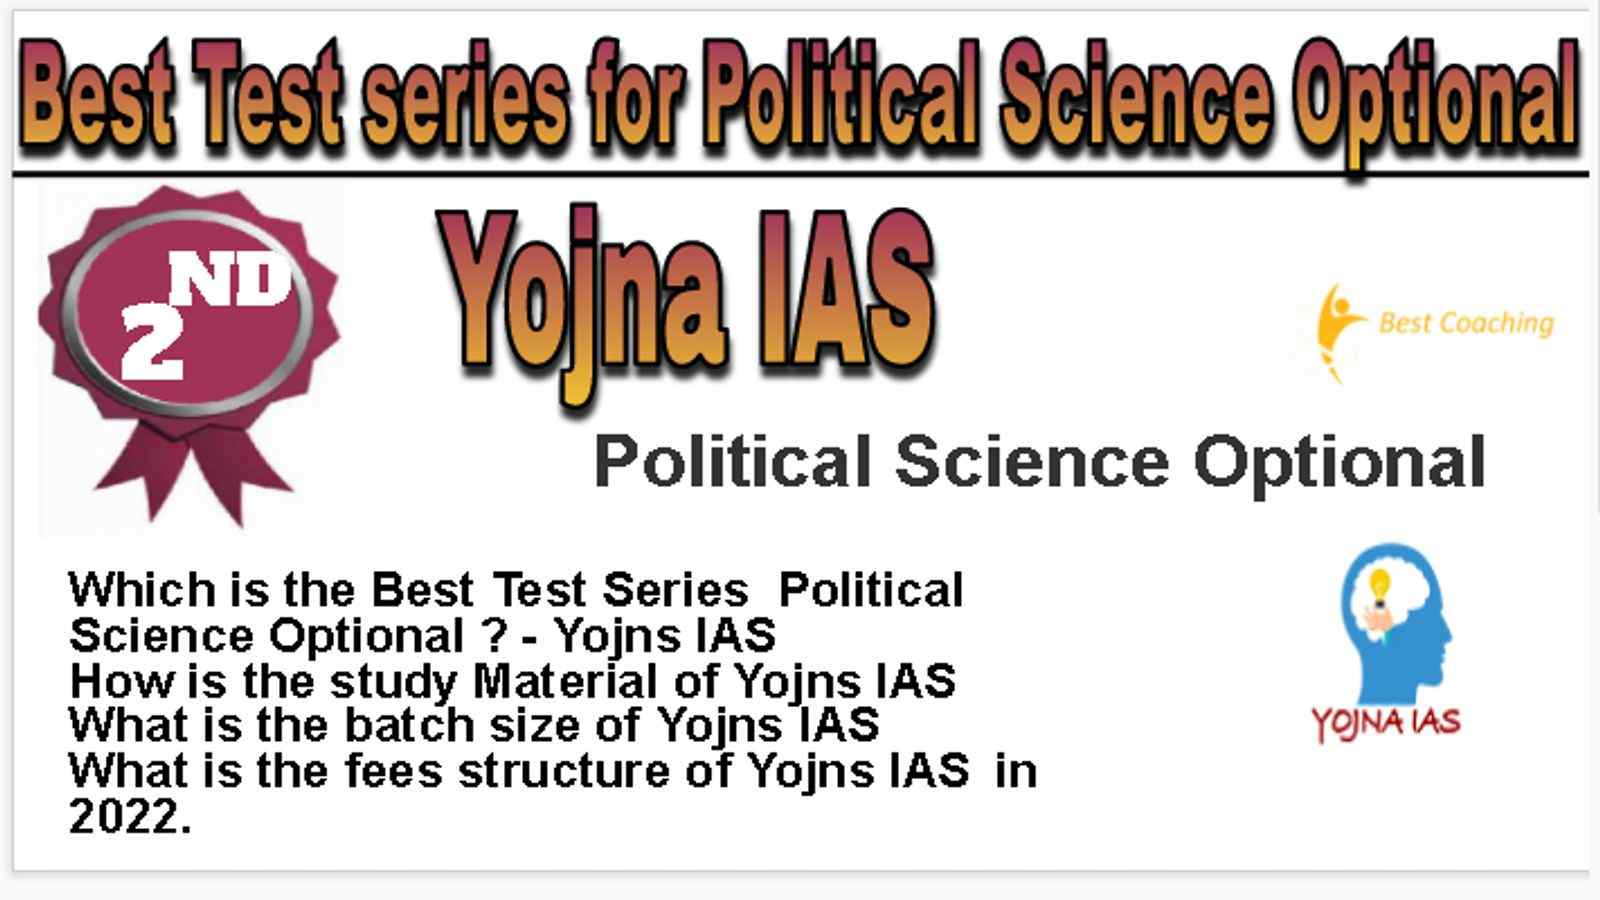 Rank 2 Best Test series for Political Science Optional